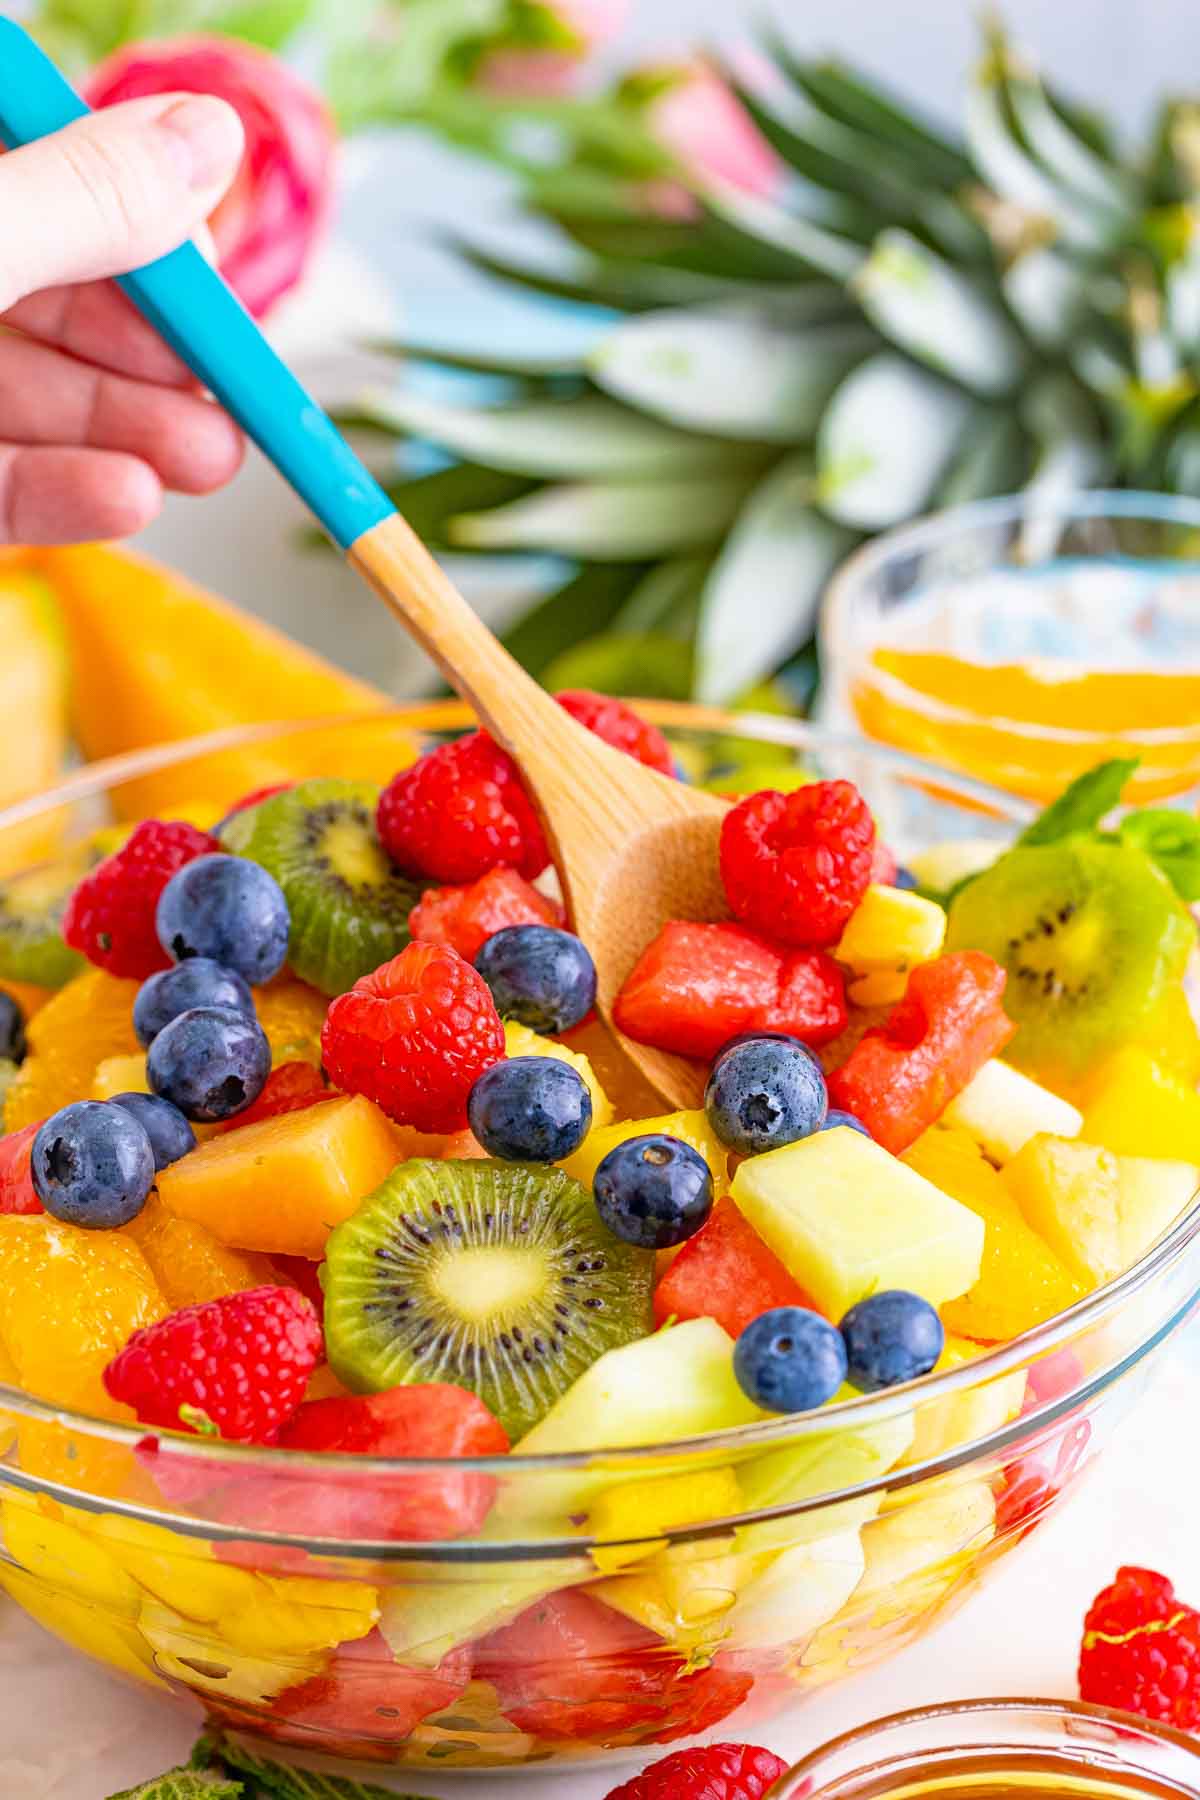 wooden spoon stirring a tropical fruit salad